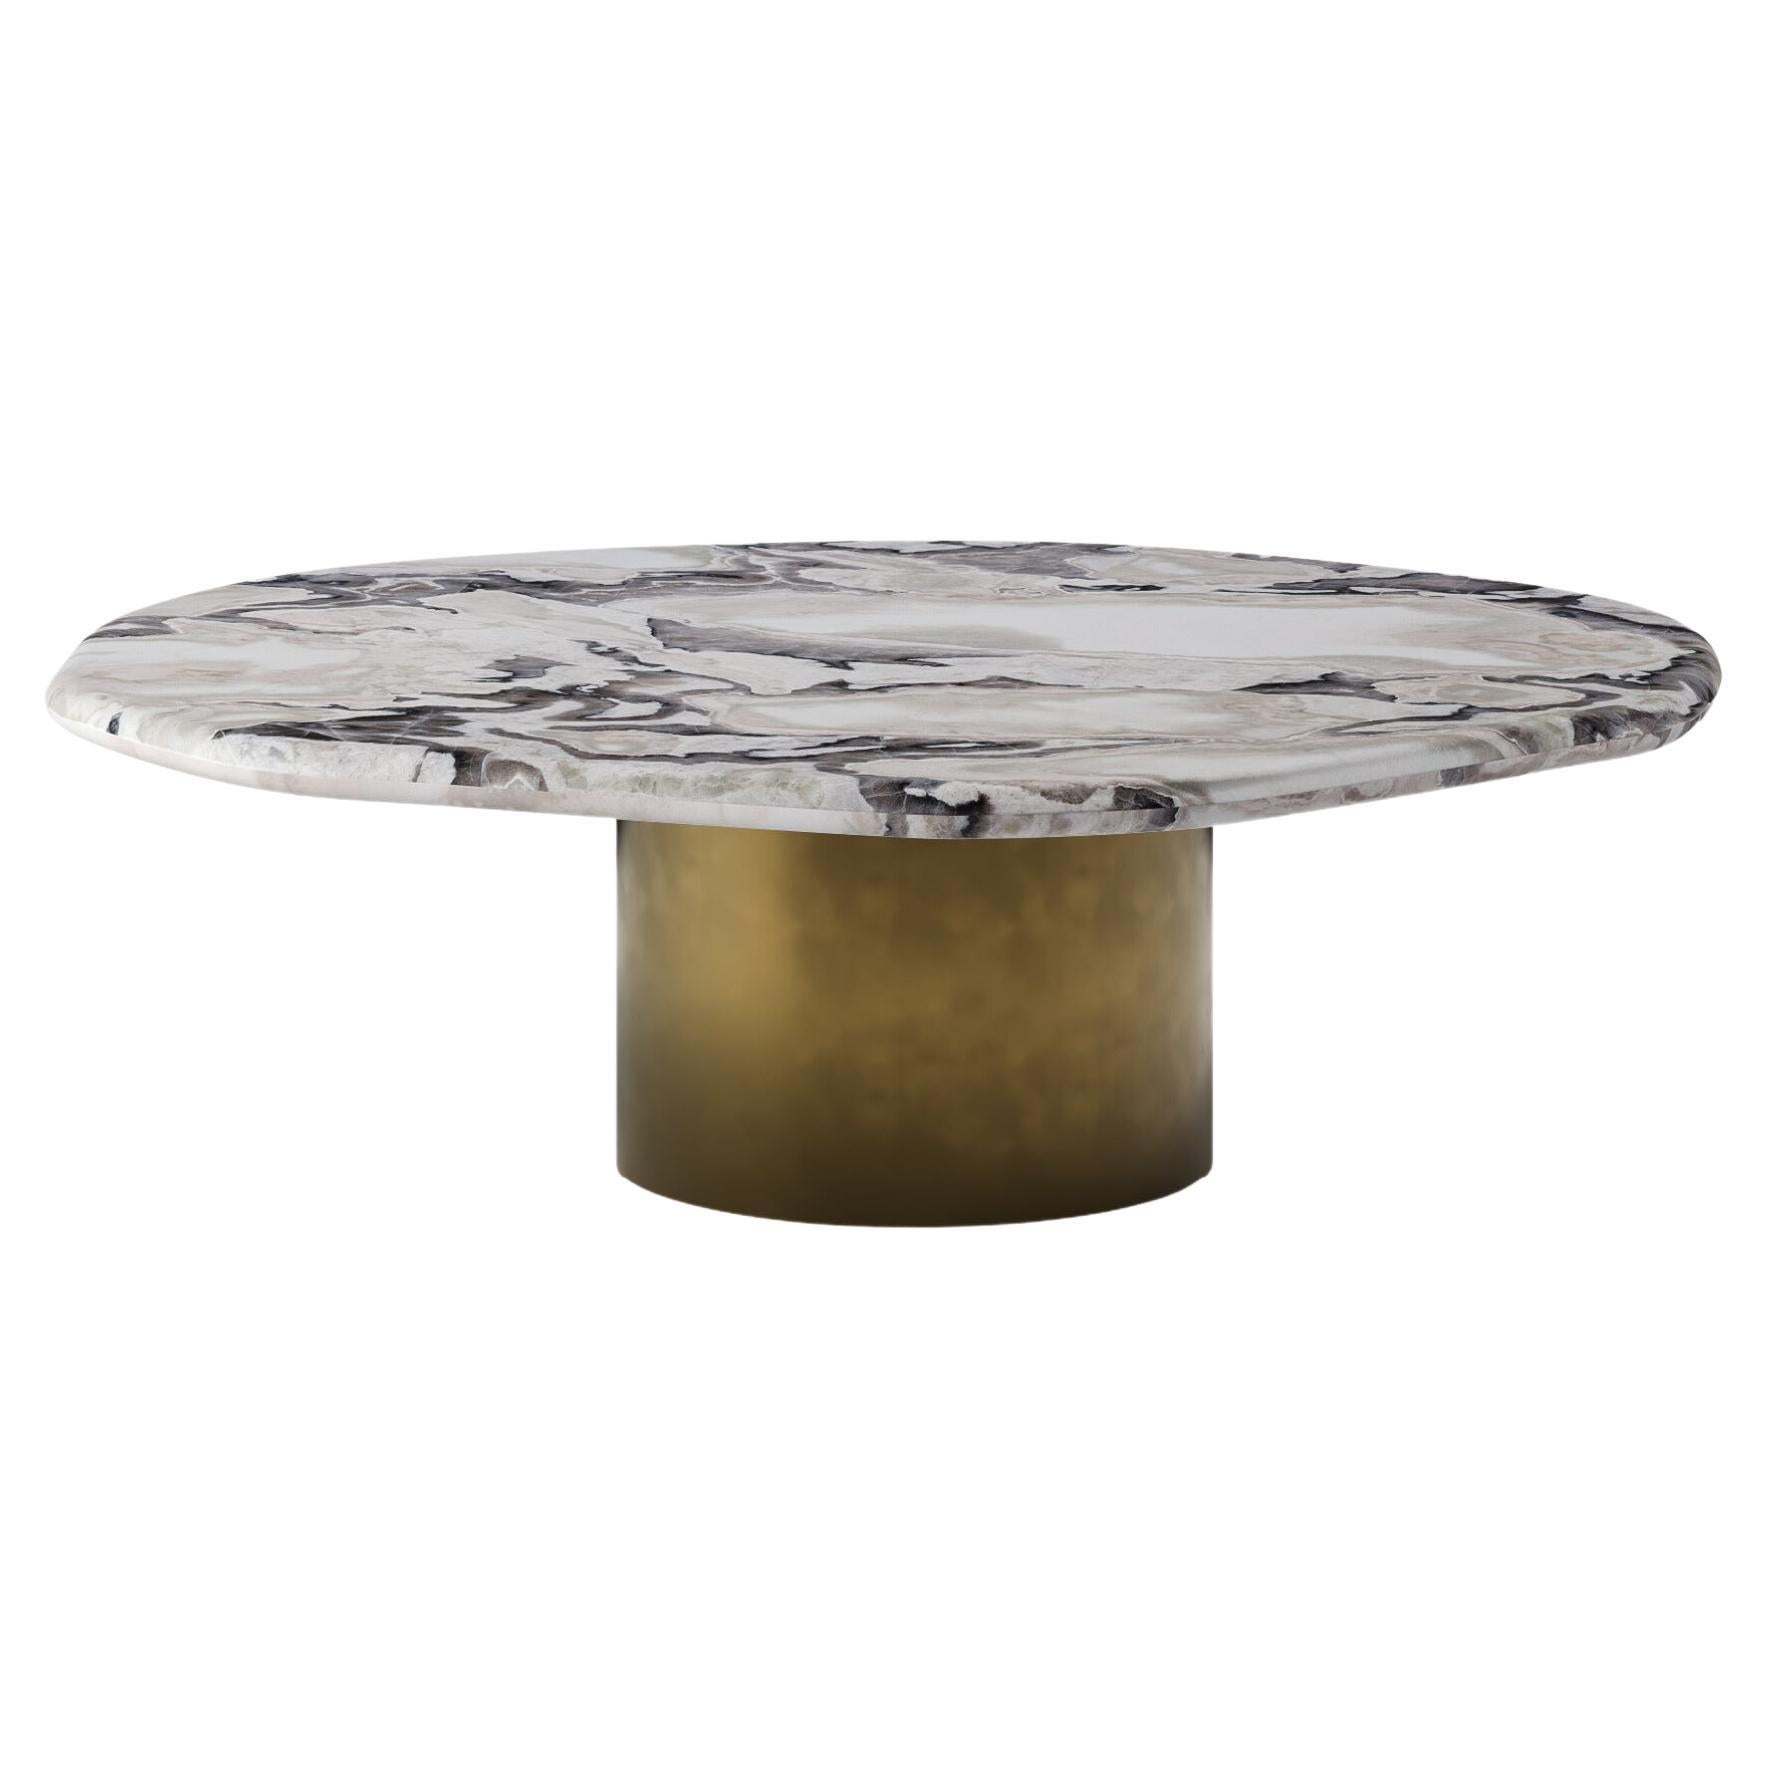 FORM(LA) Lago Round Coffee Table 54”L x 54”W x 14”H Oyster Marble & Bronze For Sale